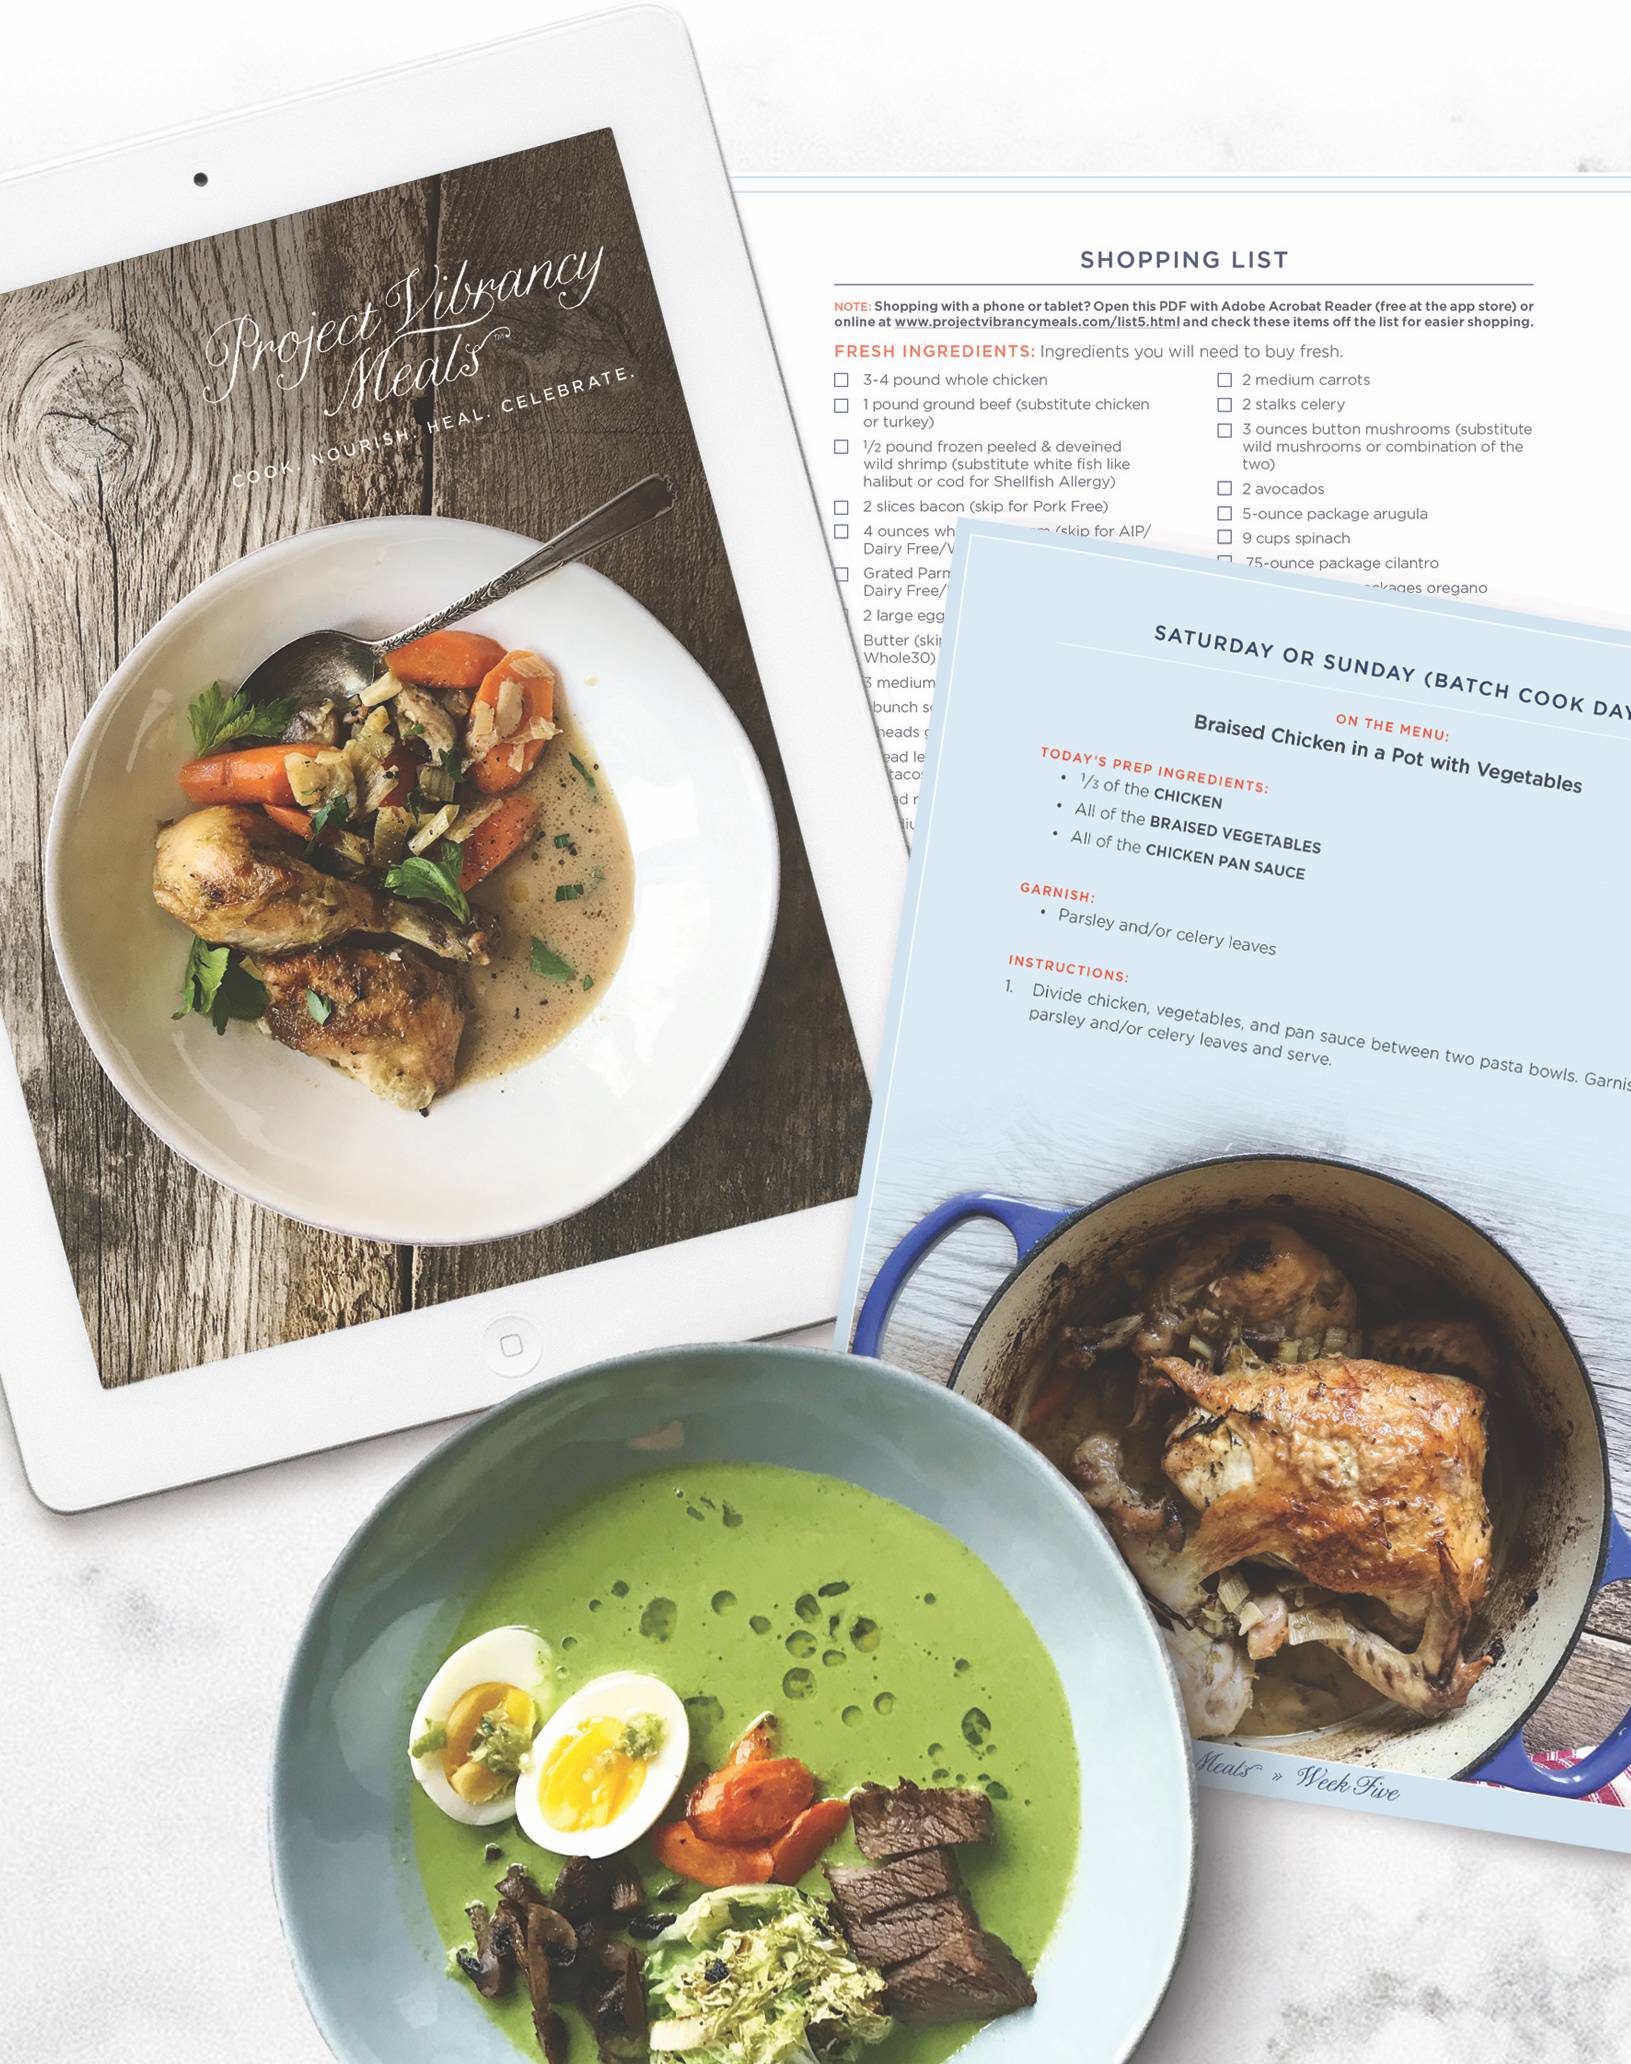 Meal planning & batch cooking can simplify mealtimes